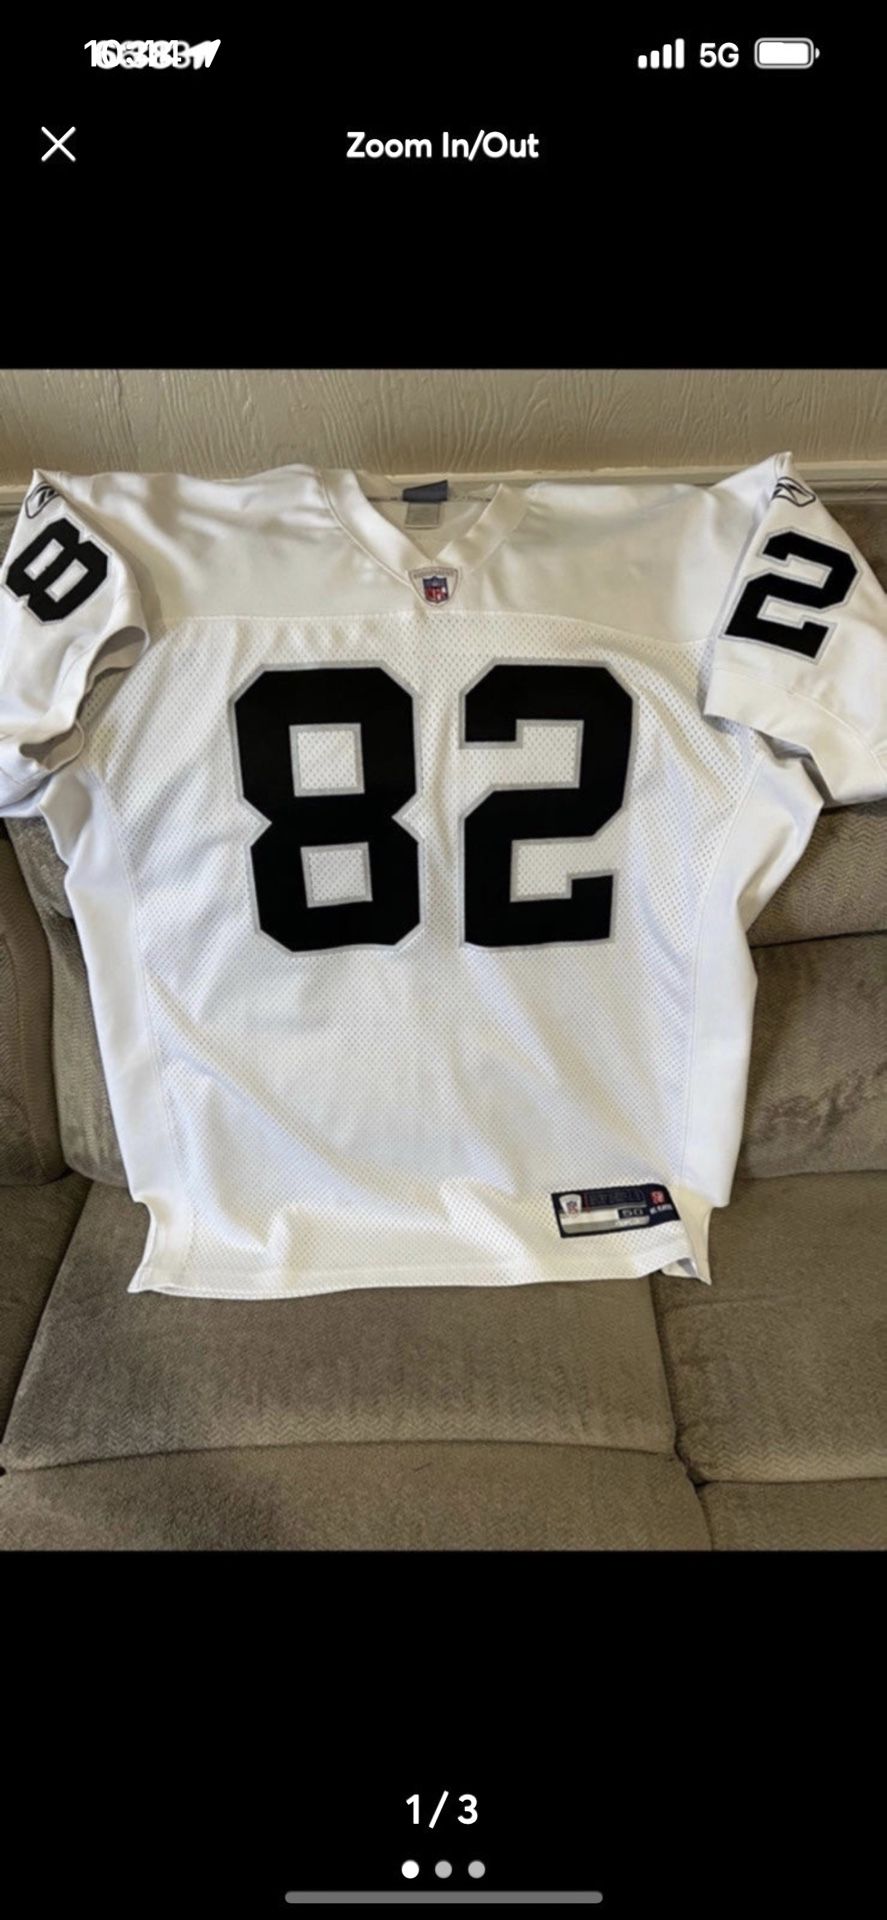 James Jett Authentic Oakland Raiders Reebok Jersey XXL 50. Jersey is used but in overall good condition for its age.